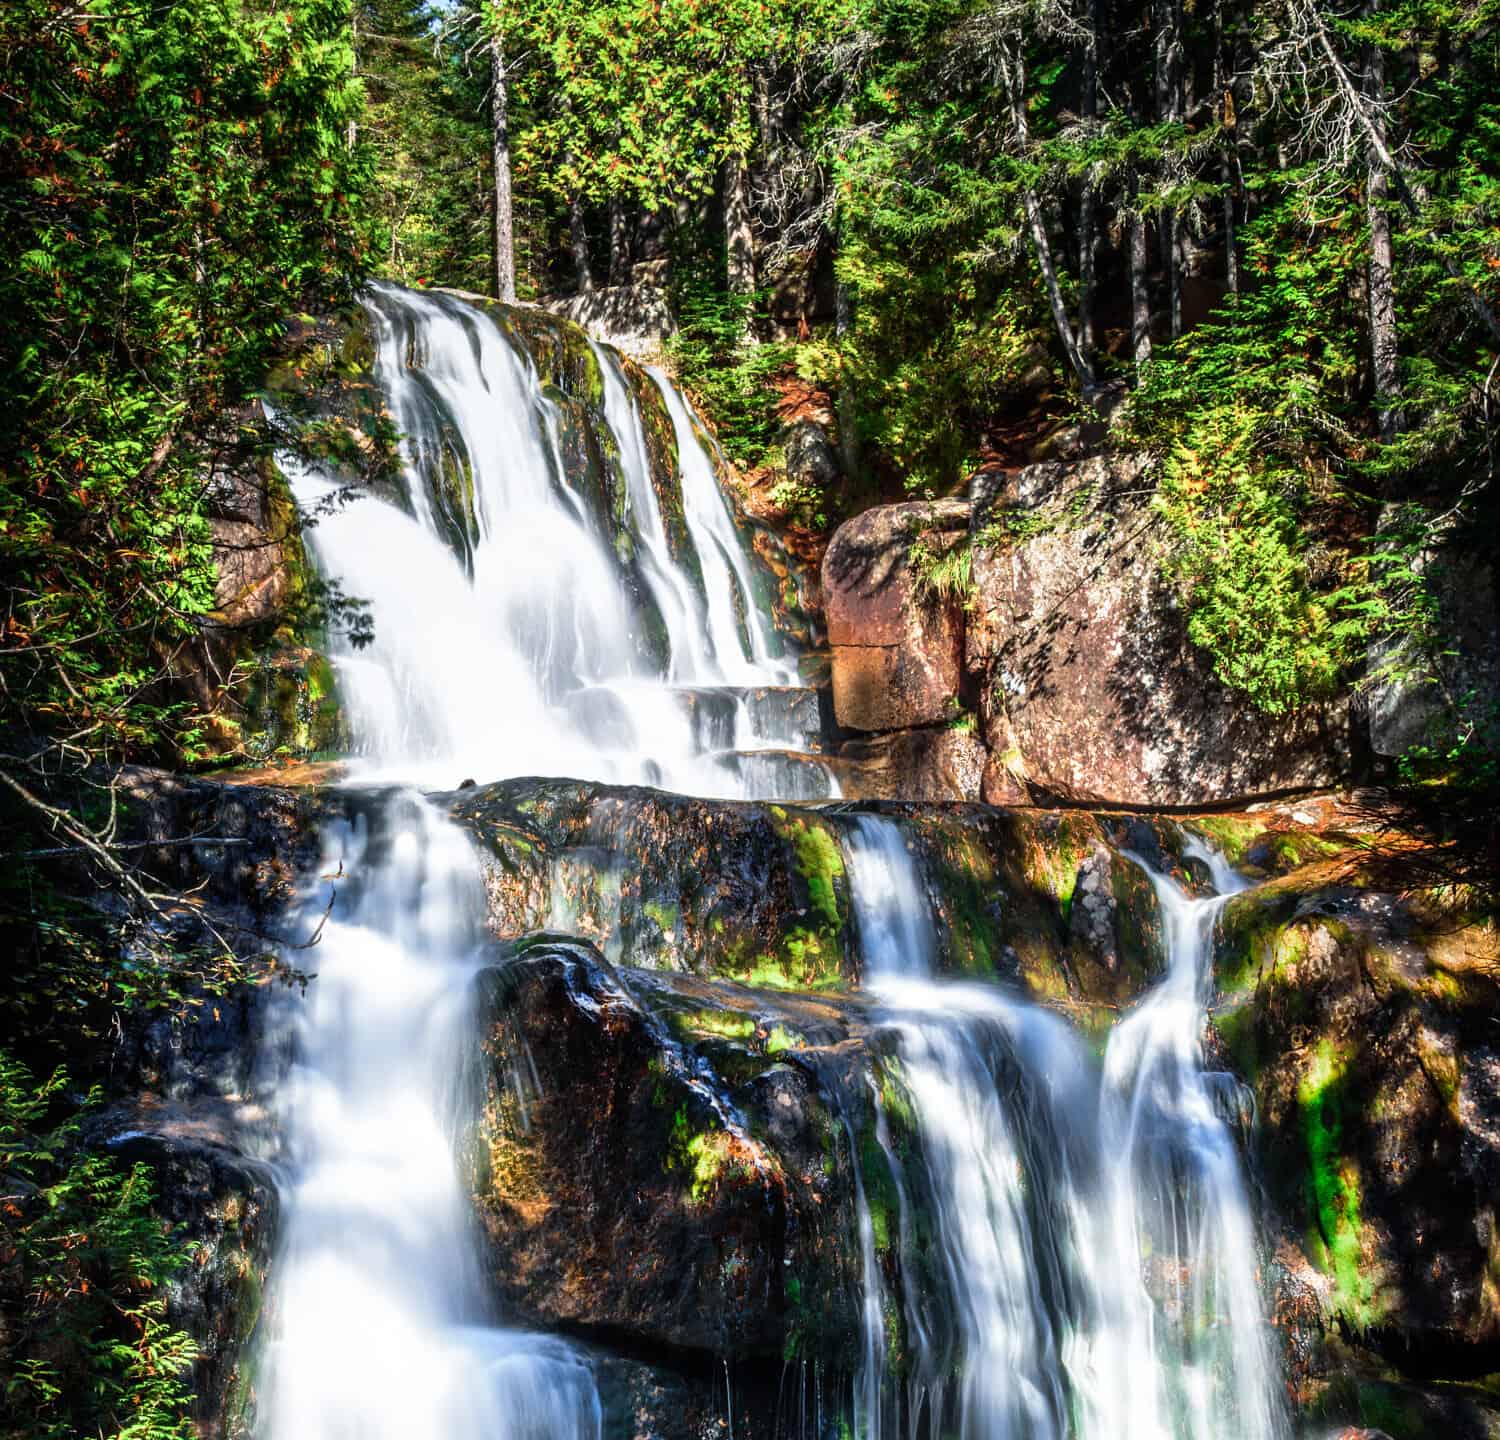 Waterfall on the side of Mount Katahdin in Maine